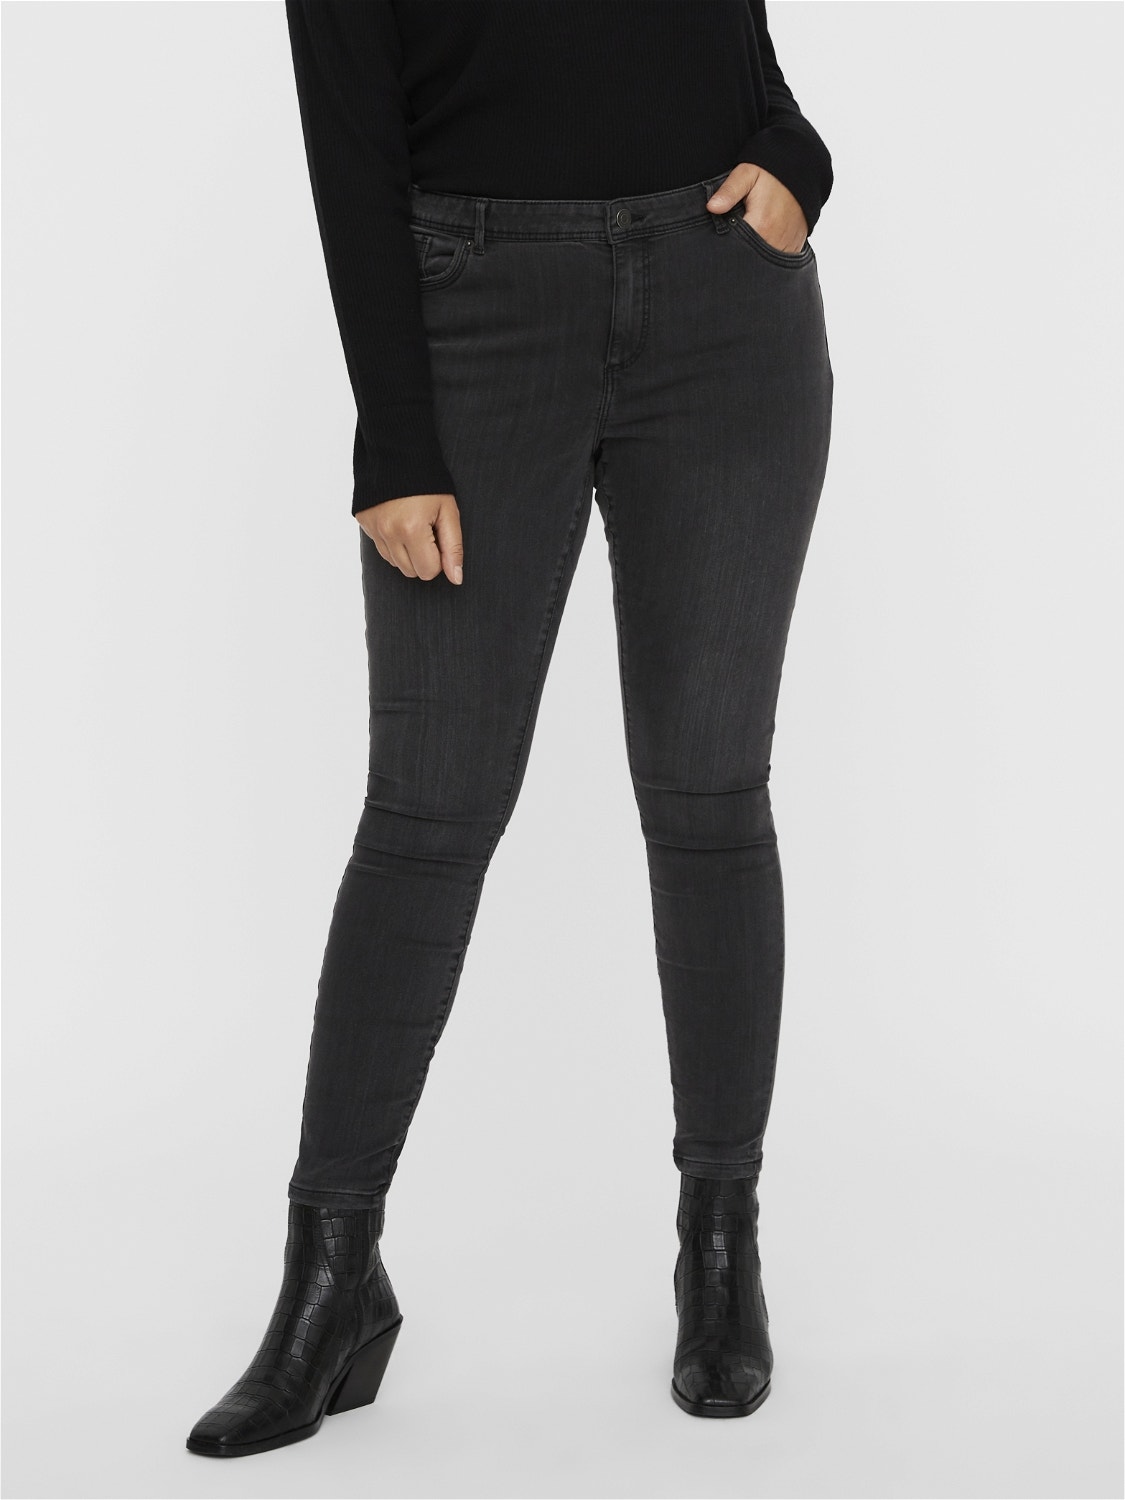 True To You Skinny Ultra High Ankle Jeans Black Ladies H&M, 54% OFF